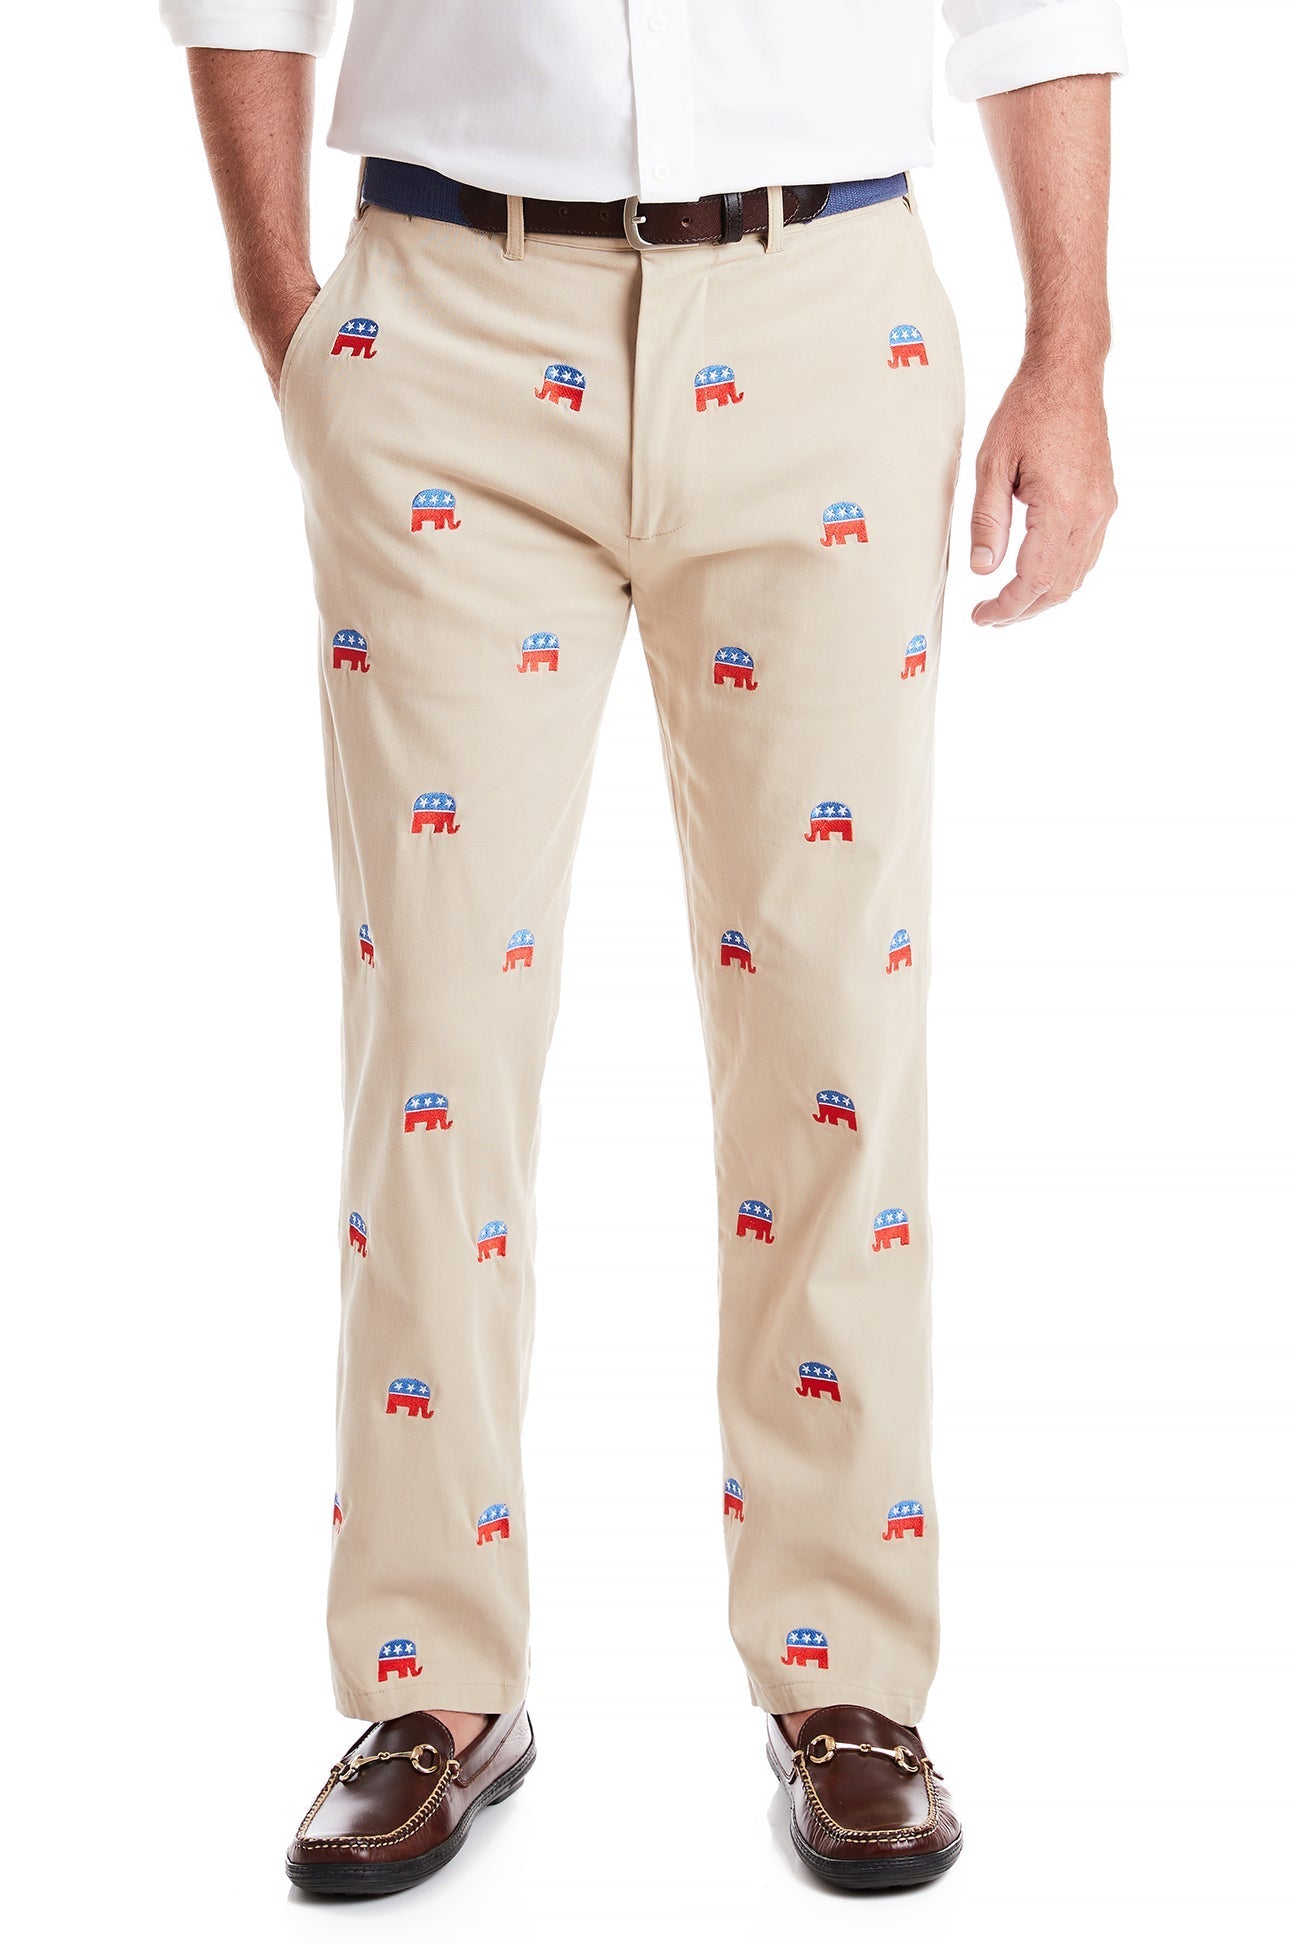 Harbor Pant Stretch Twill Khaki with GOP Elephant MENS EMBROIDERED PANTS Castaway Nantucket Island